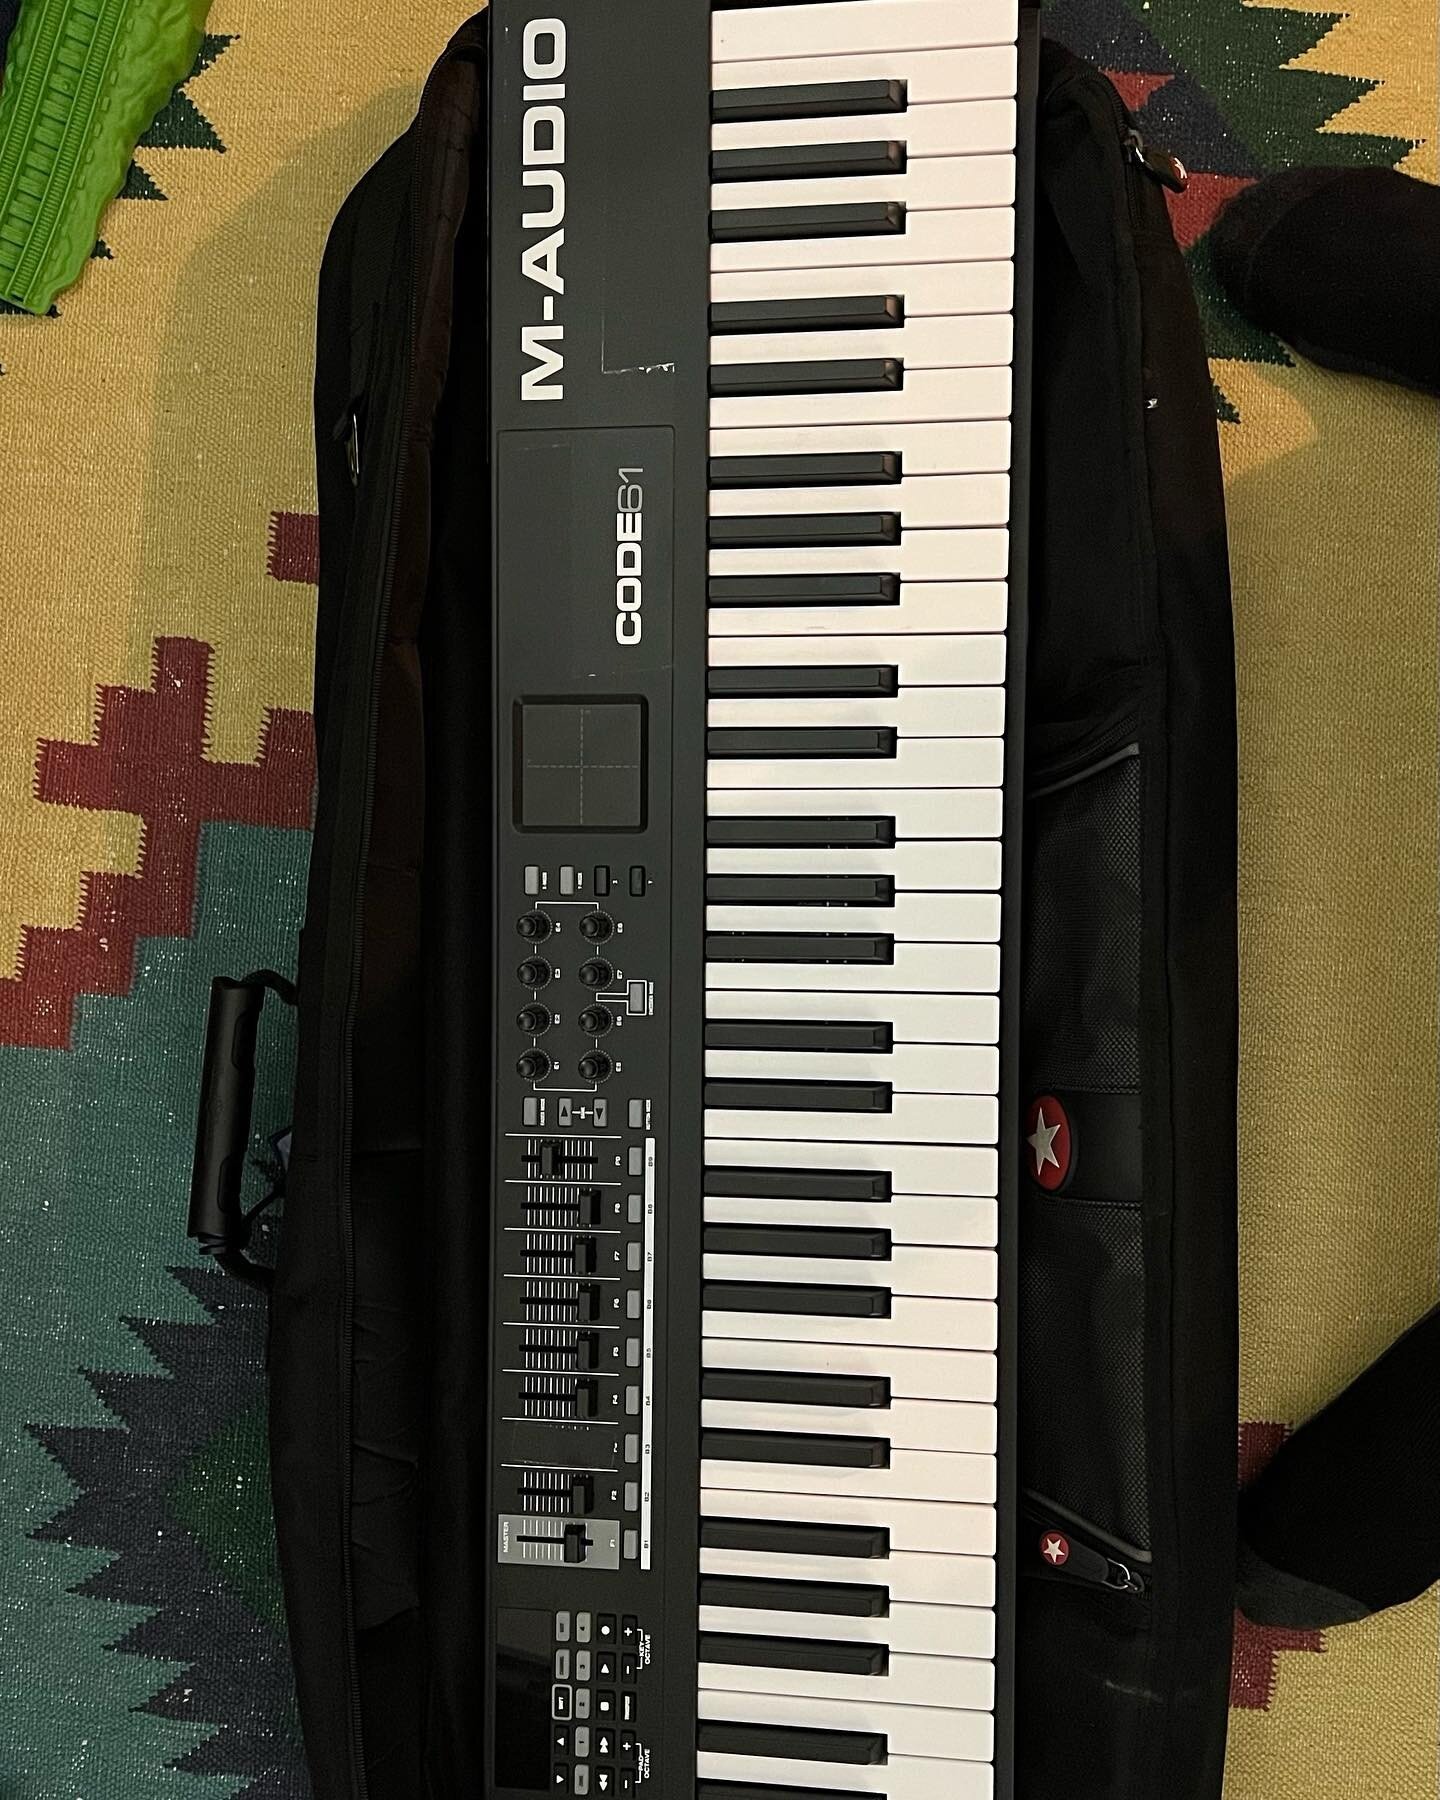 Updated! Hey friends! I&rsquo;m getting ready to sell some gear (and a Nest thermostat!), and before I list on Facebook Marketplace or somewhere else, I thought I&rsquo;d drop it here first. Everything is in good condition - DM me for prices/interest